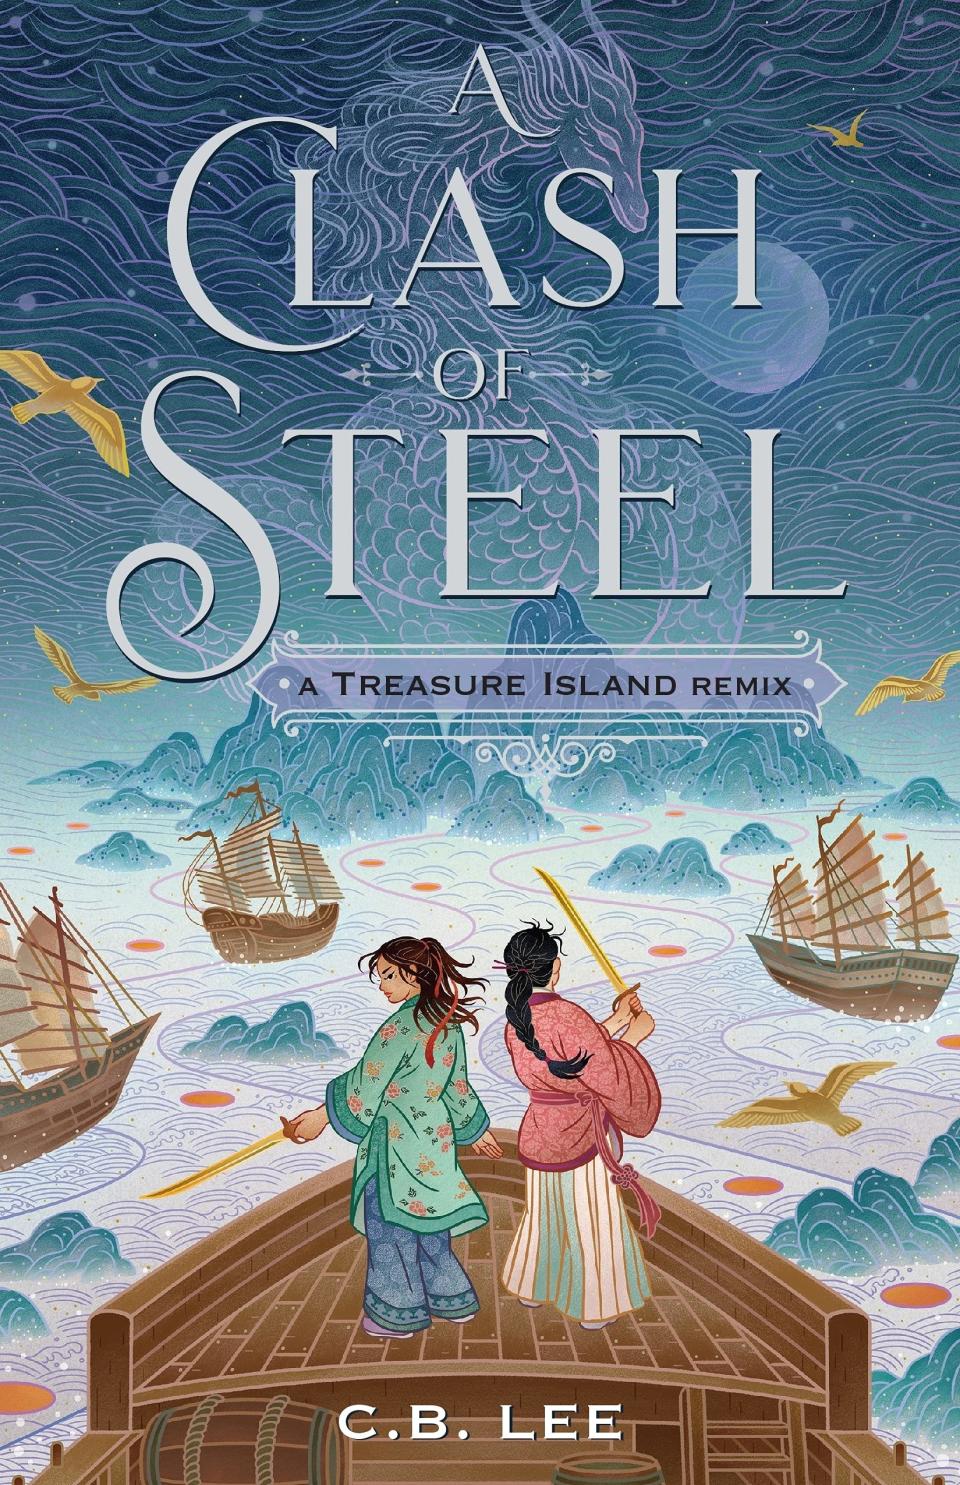 1826. Xiang is desperate to prove herself to the mother that never has enough time for her. She unexpectedly gets a chance at adventure when her pendant, the one memento of her father who died at sea before she was born, is stolen by a mysterious girl named Anh. But Anh returns after realizing there is a tiny map scroll hidden inside that she needs Xiang to help decode, and the two set off on a journey toward fabled treasure and her father's secrets.   Get it from Bookshop or from your local indie via Indiebound here.